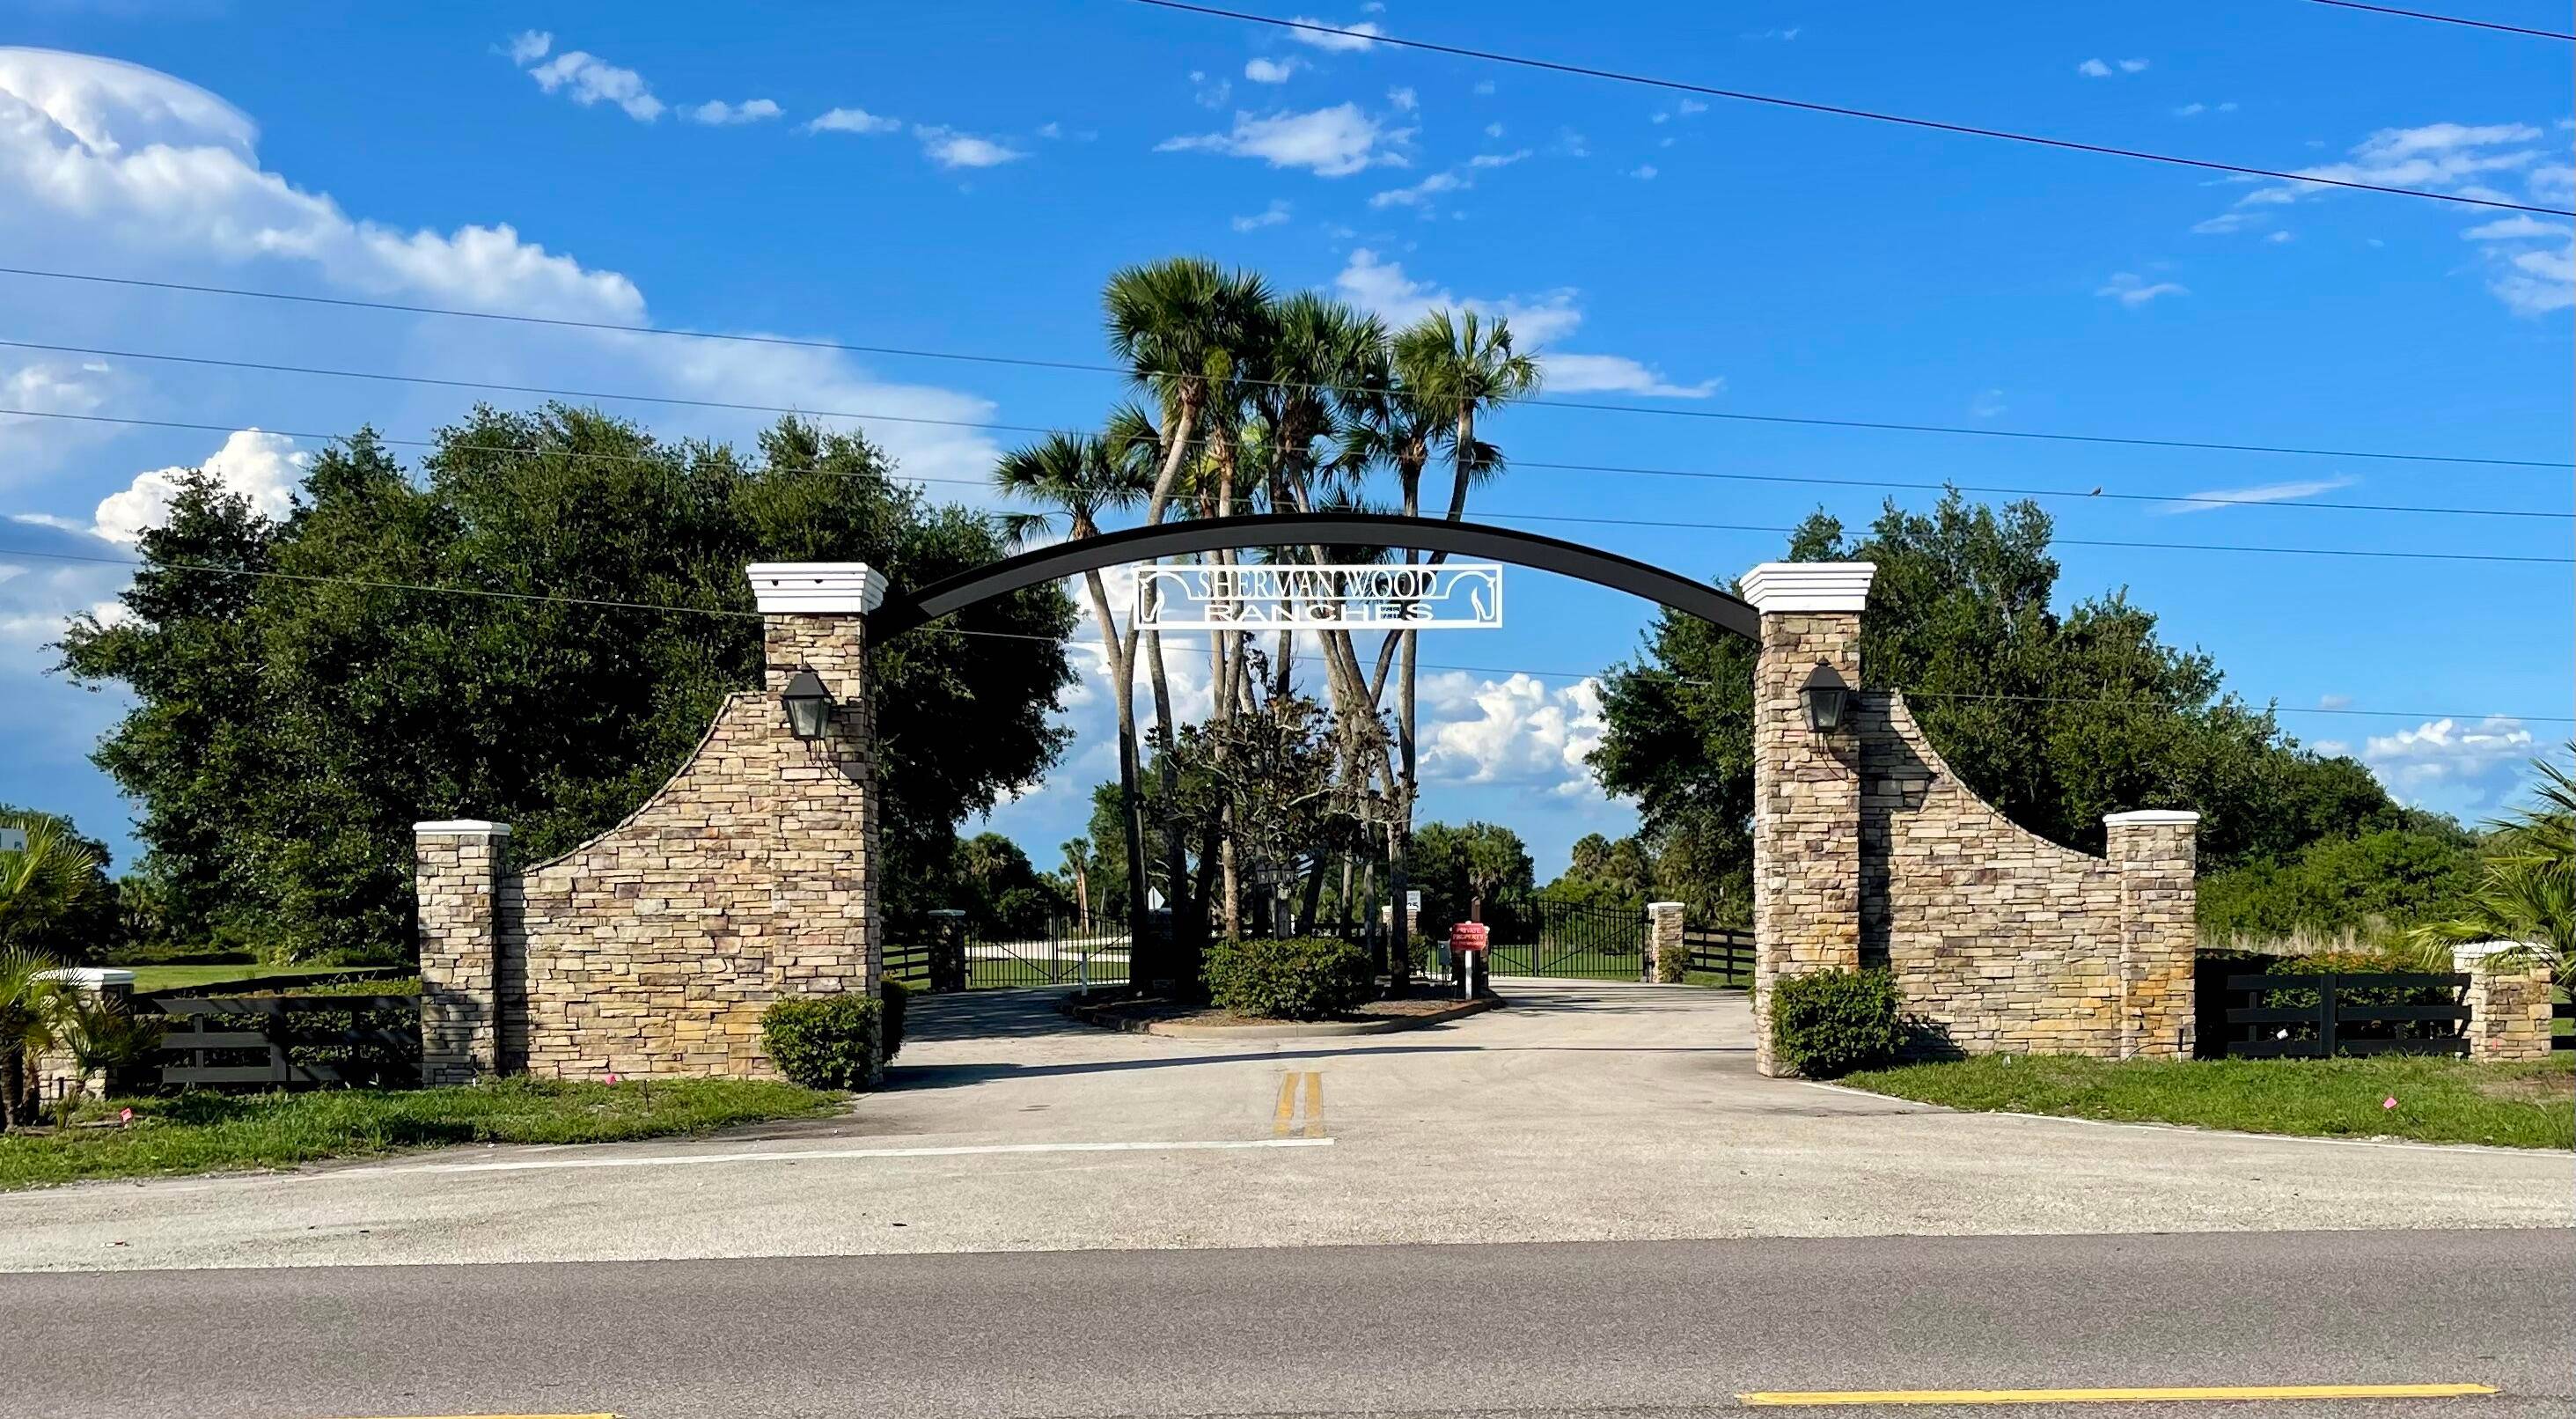 Welcome to Sherman Wood Ranches conveniently located to the East Coast on Hwy 710 In the SE section of Okeechobee County.